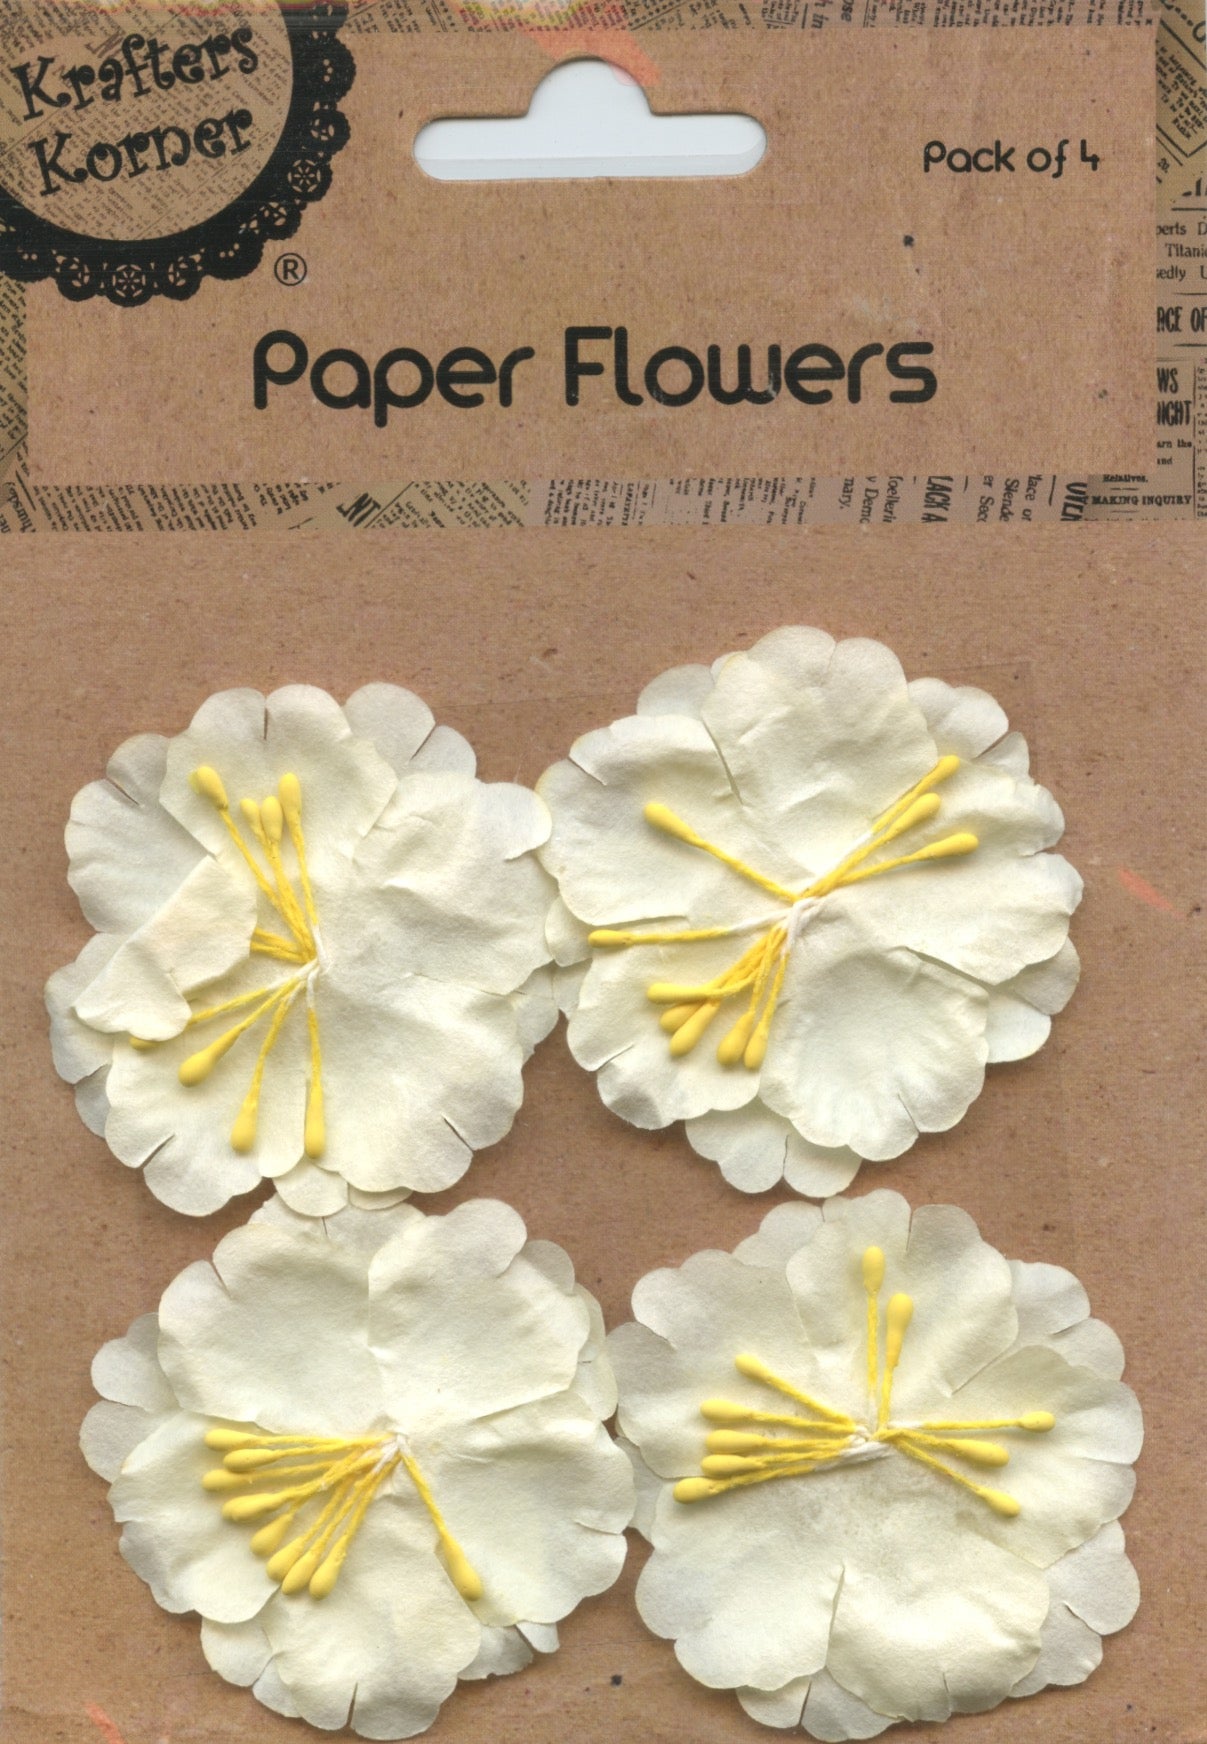 Paper Flowers - Cream with yellow stamens - 4 Pk